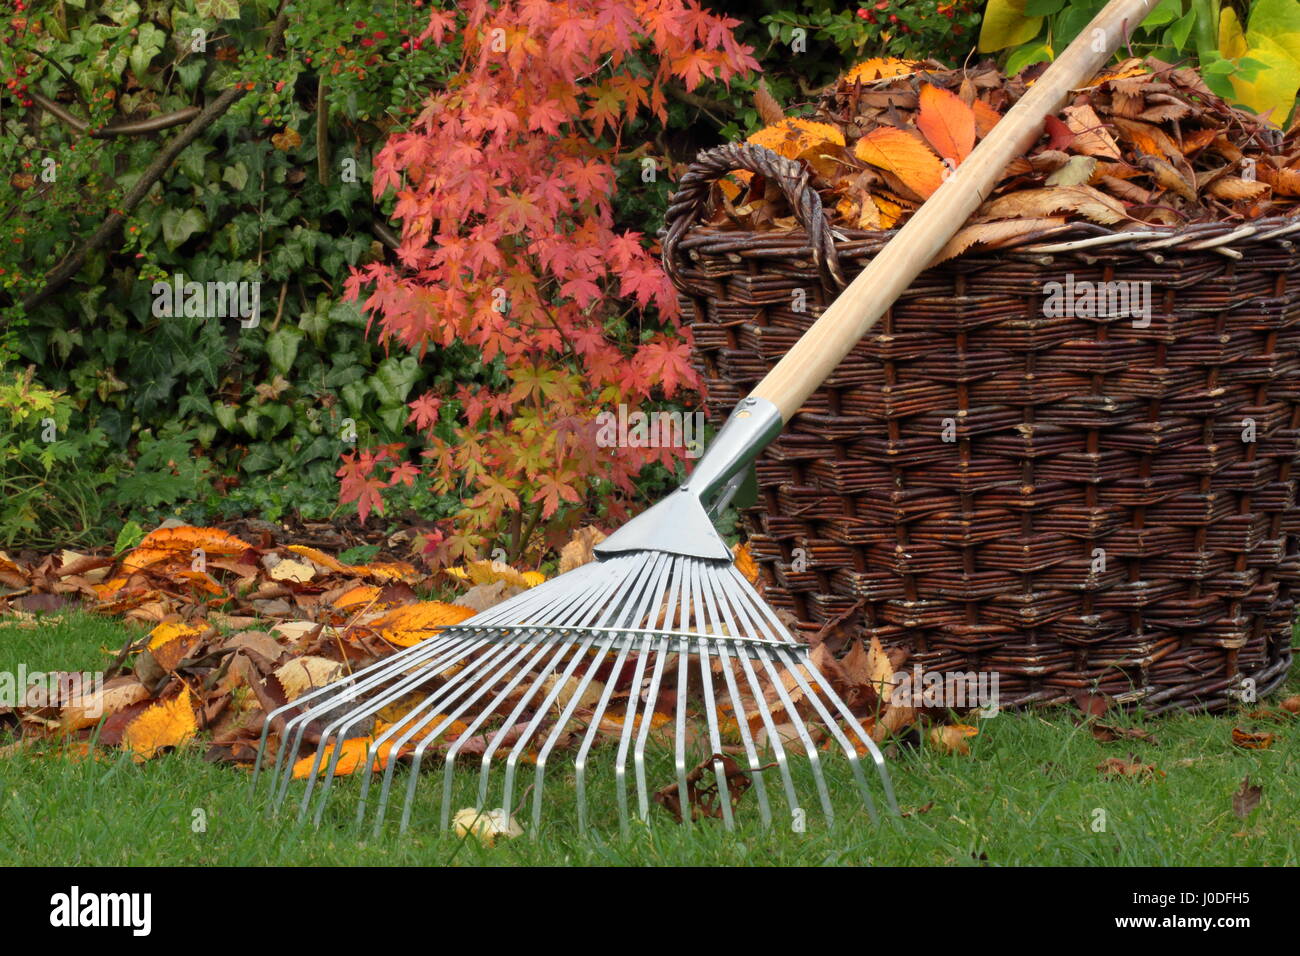 Fallen leaves cleared from a garden lawn into a woven basket on a bright autumn day Stock Photo